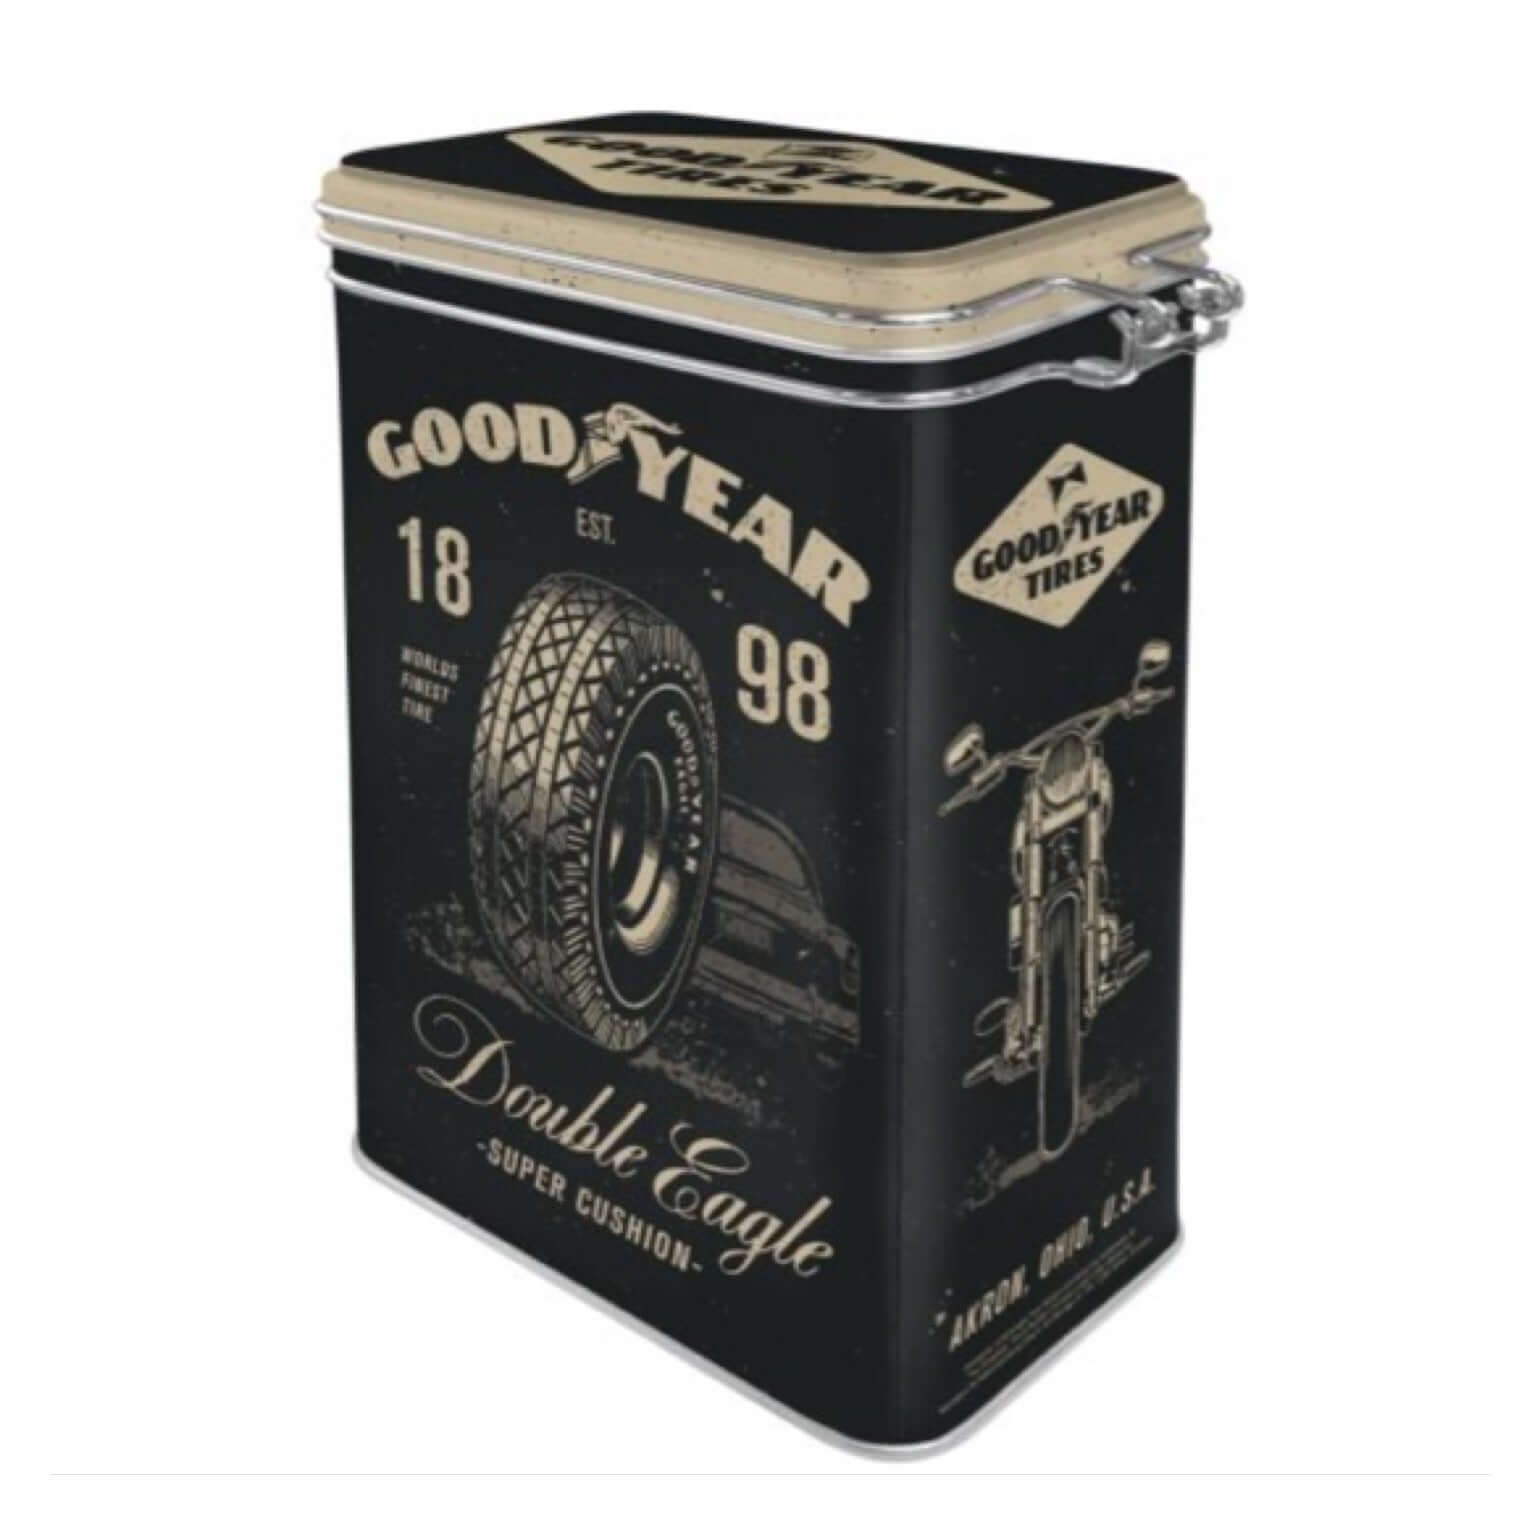 Box Tin Container Good Year Motorcycle Vintage Retro - The Renmy Store Homewares & Gifts 